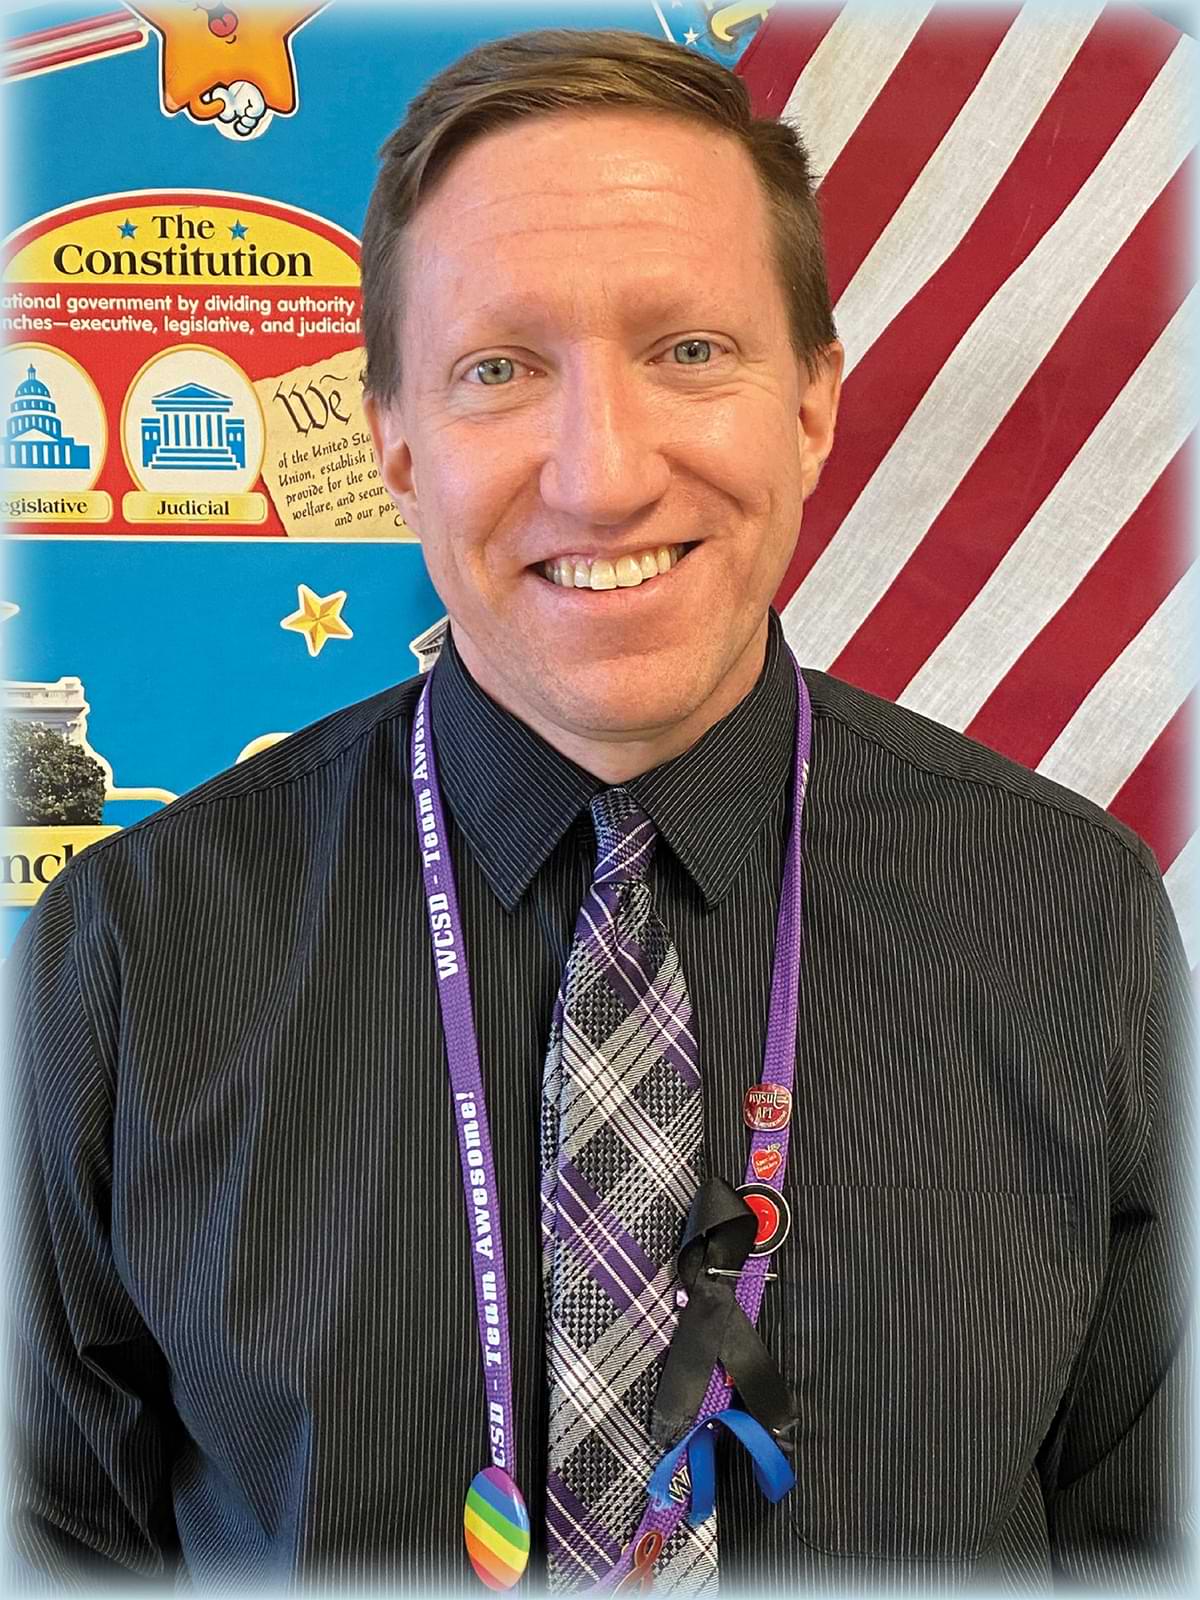 lawyer and social studies teacher Kevin Todd photographed smiling in front of a school graphic about the Constitution